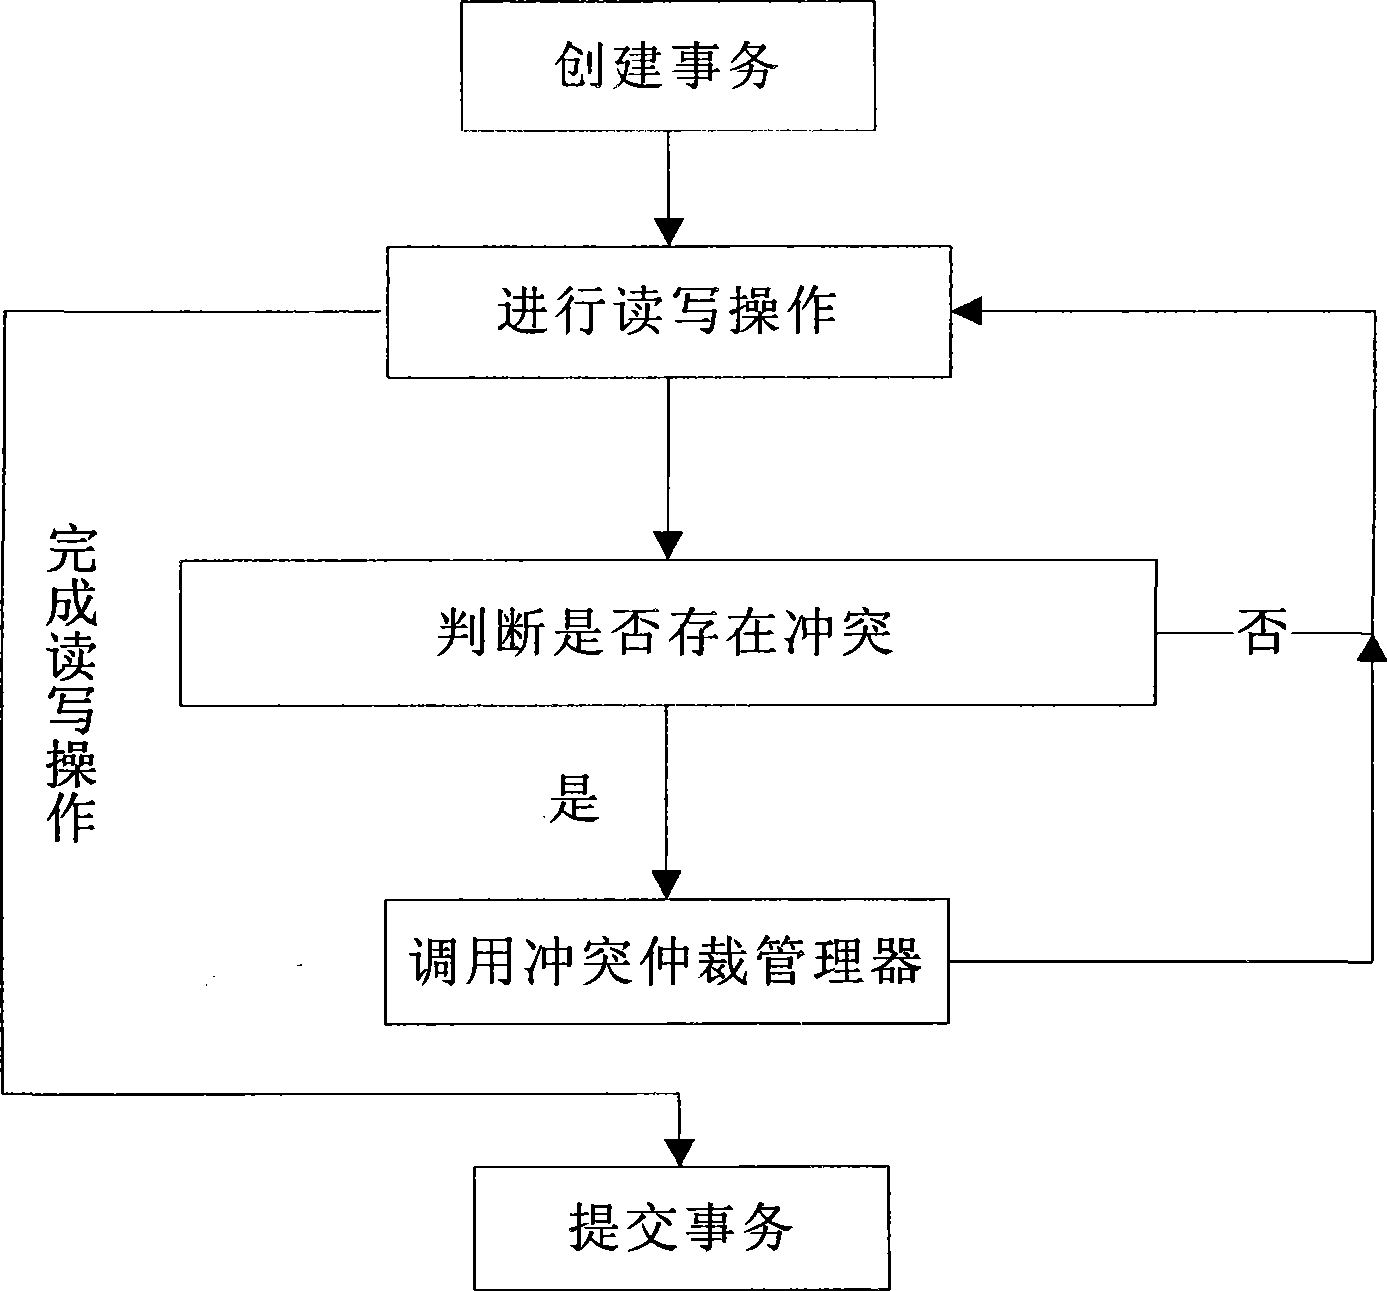 Software transaction internal memory implementing method based on delaying policy